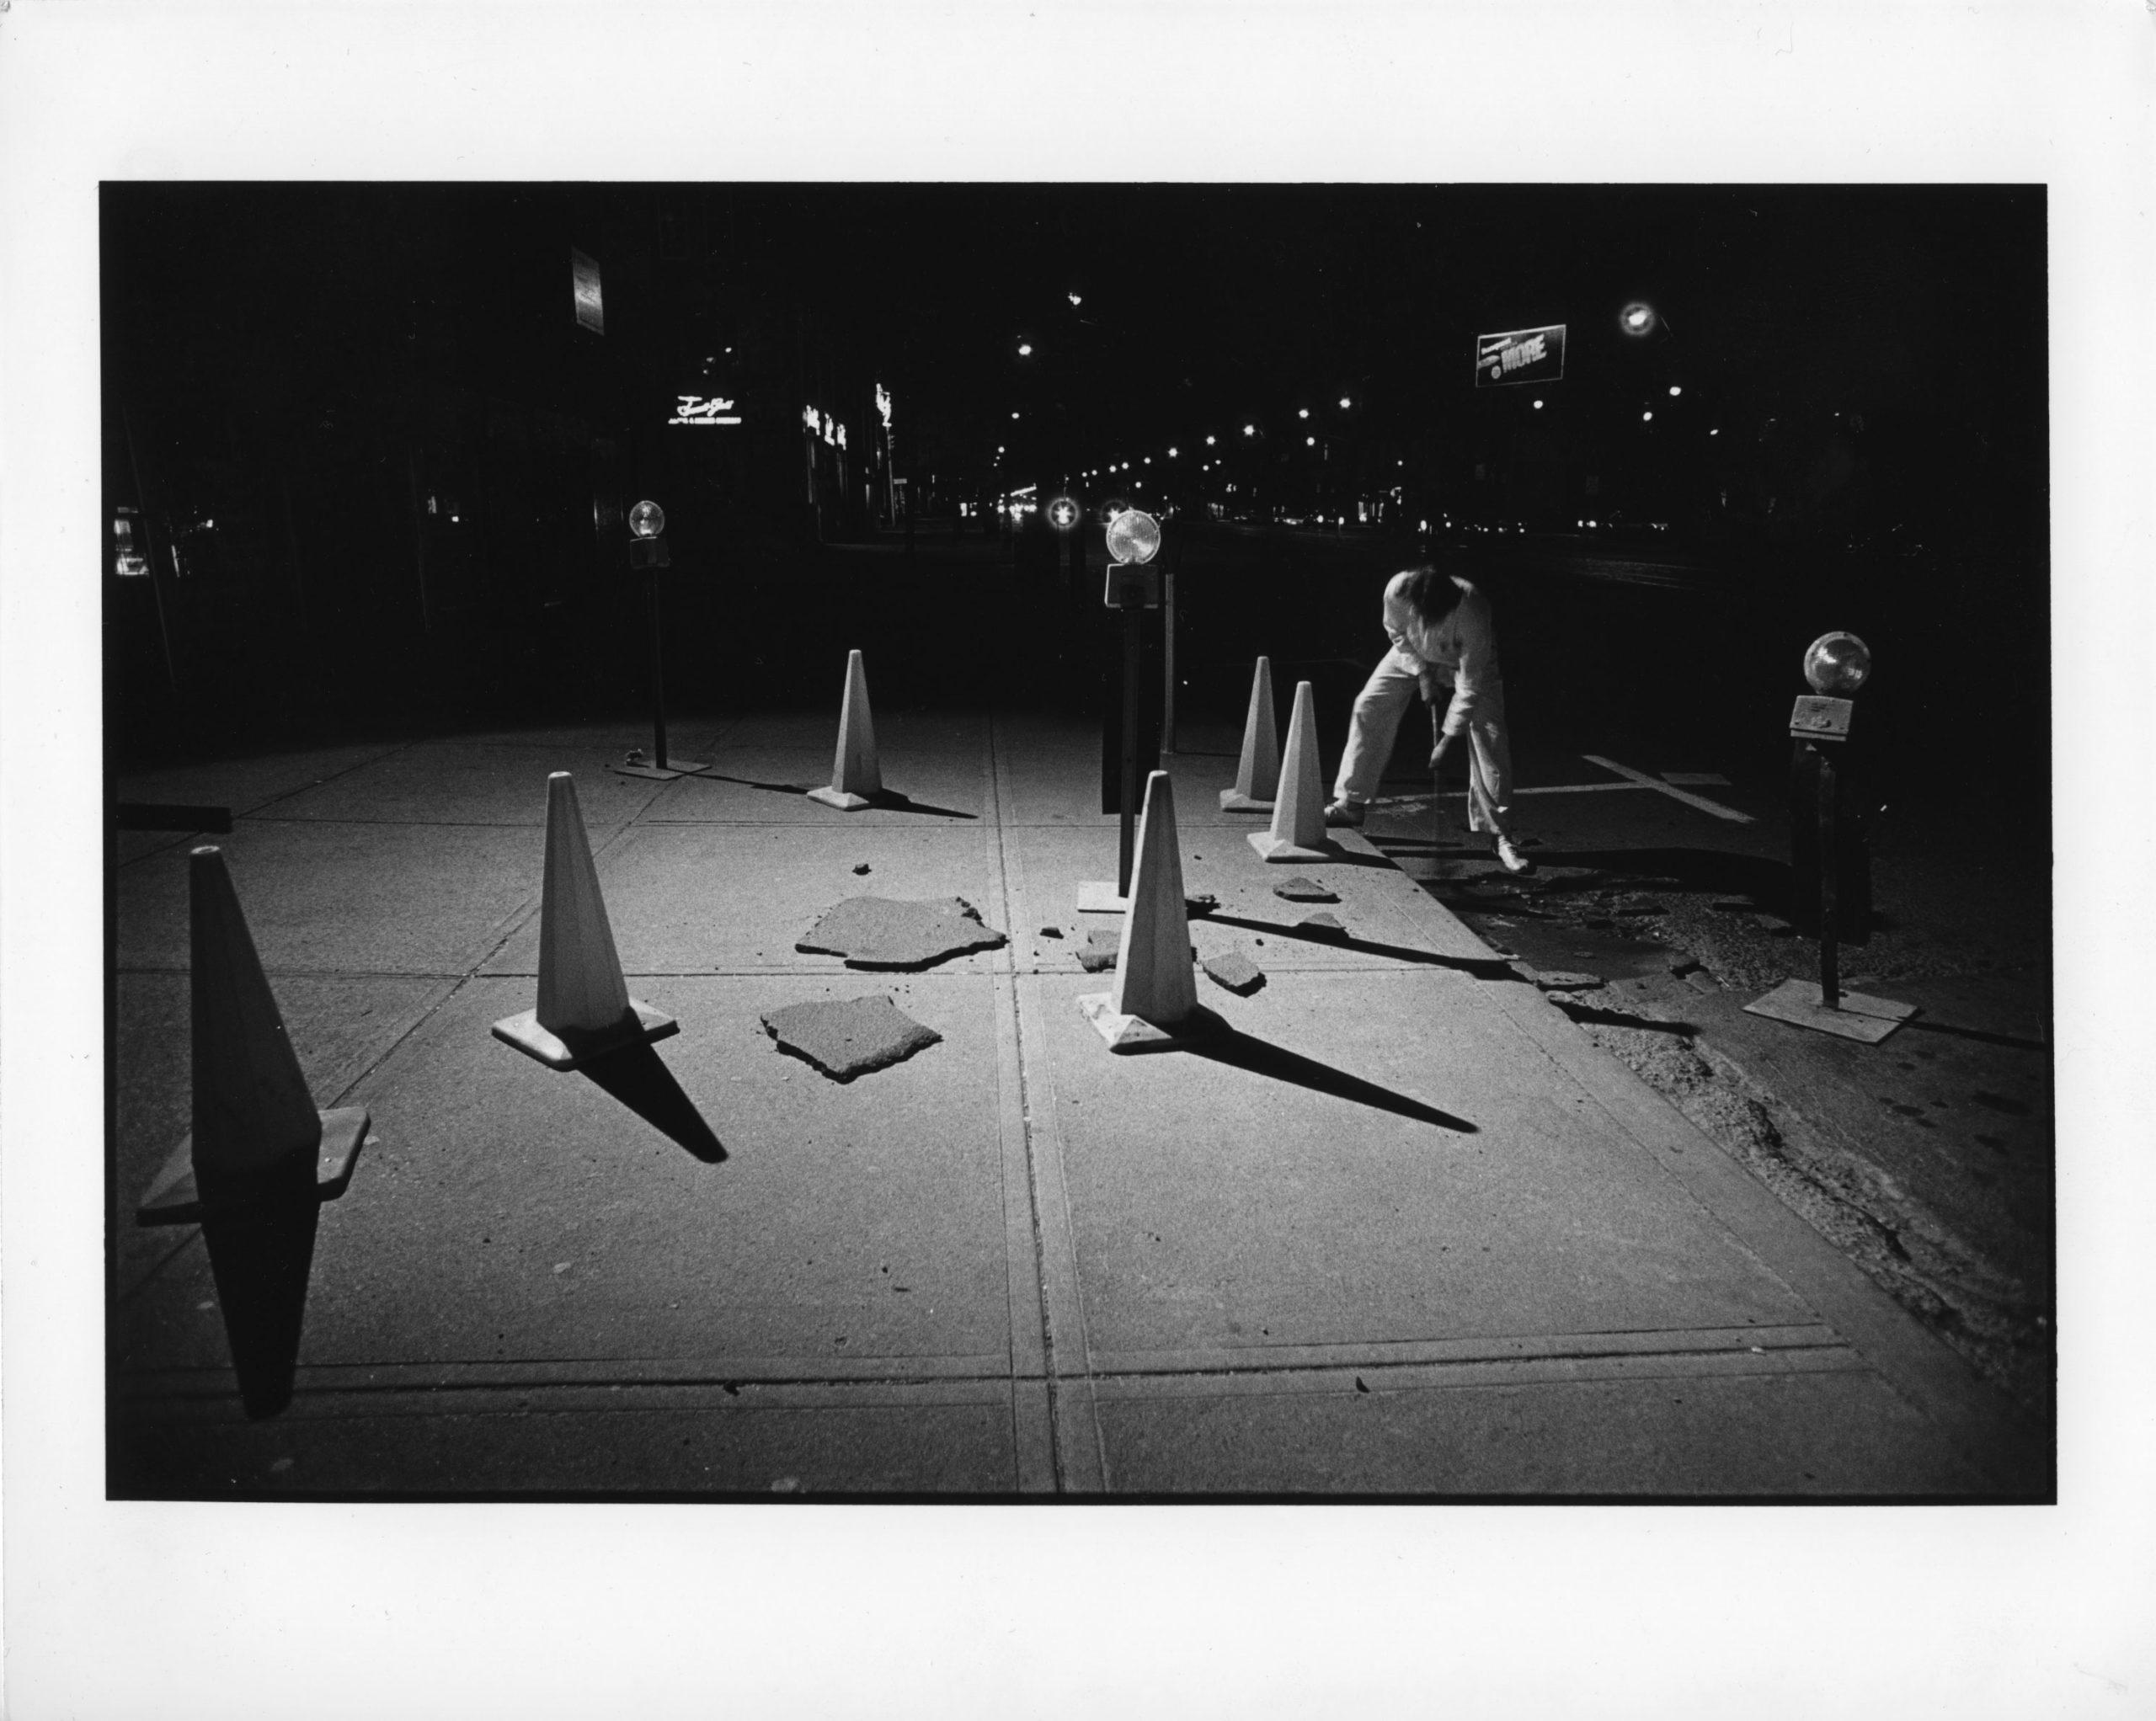 black and white photograph of sculptural art in an urban environment at night